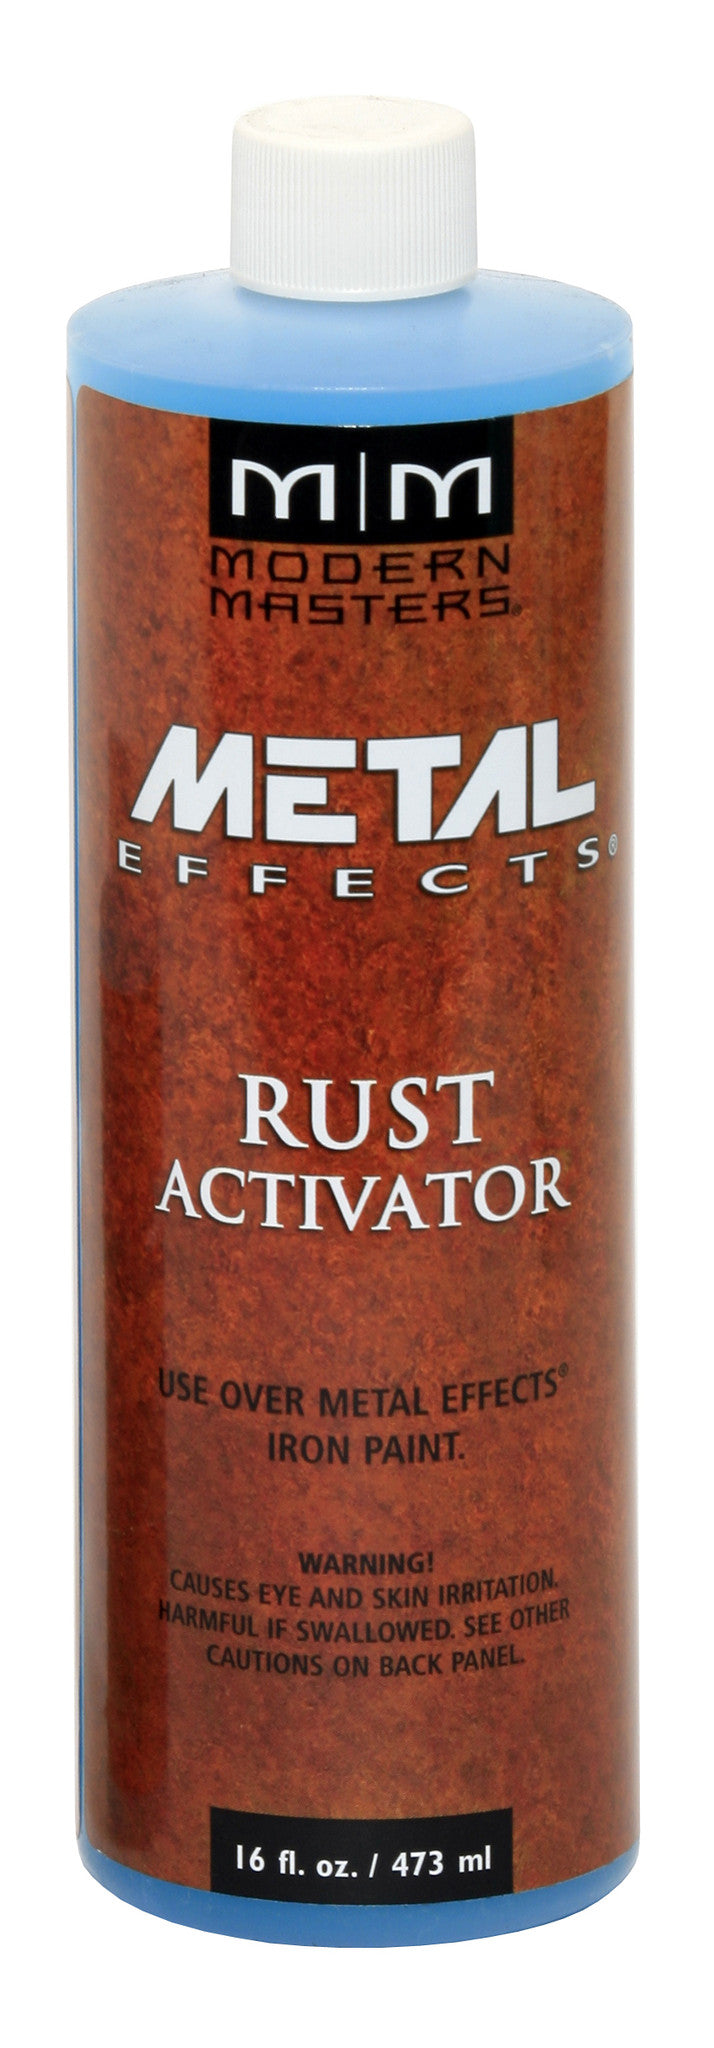 Metal Effects Rust Activator - 16 ounce